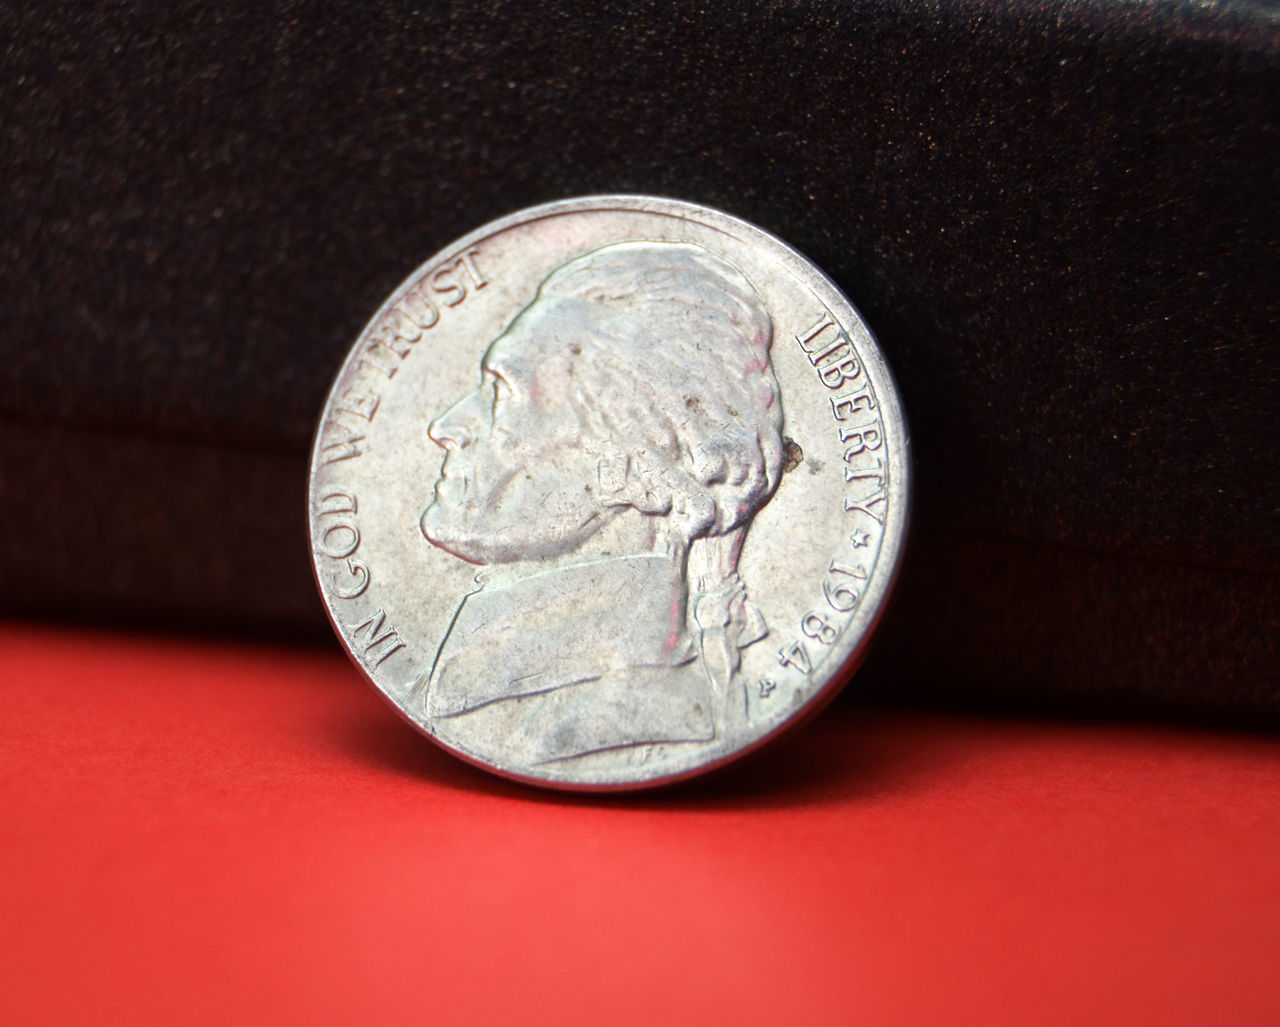 CLOSE-UP OF COIN ON THE BACKGROUND